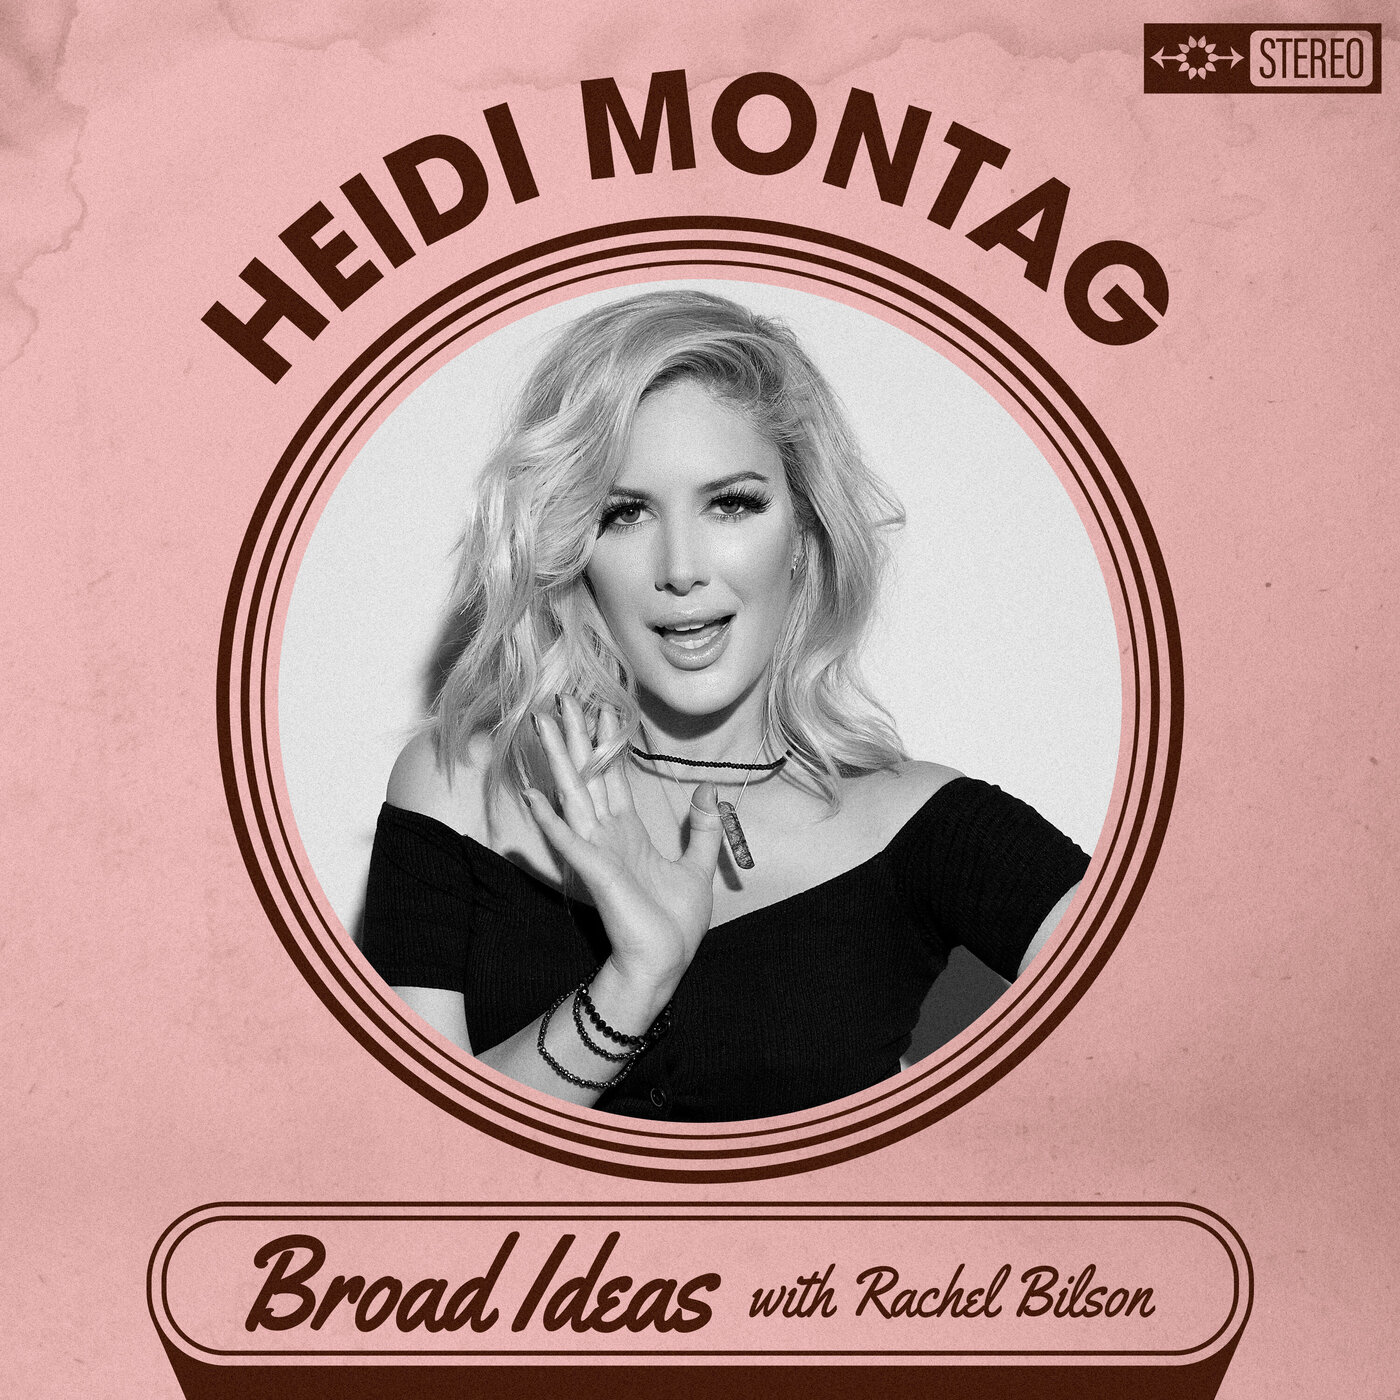 Heidi Montag on The Hills, Plastic Surgery and the Sex Tape Rumors